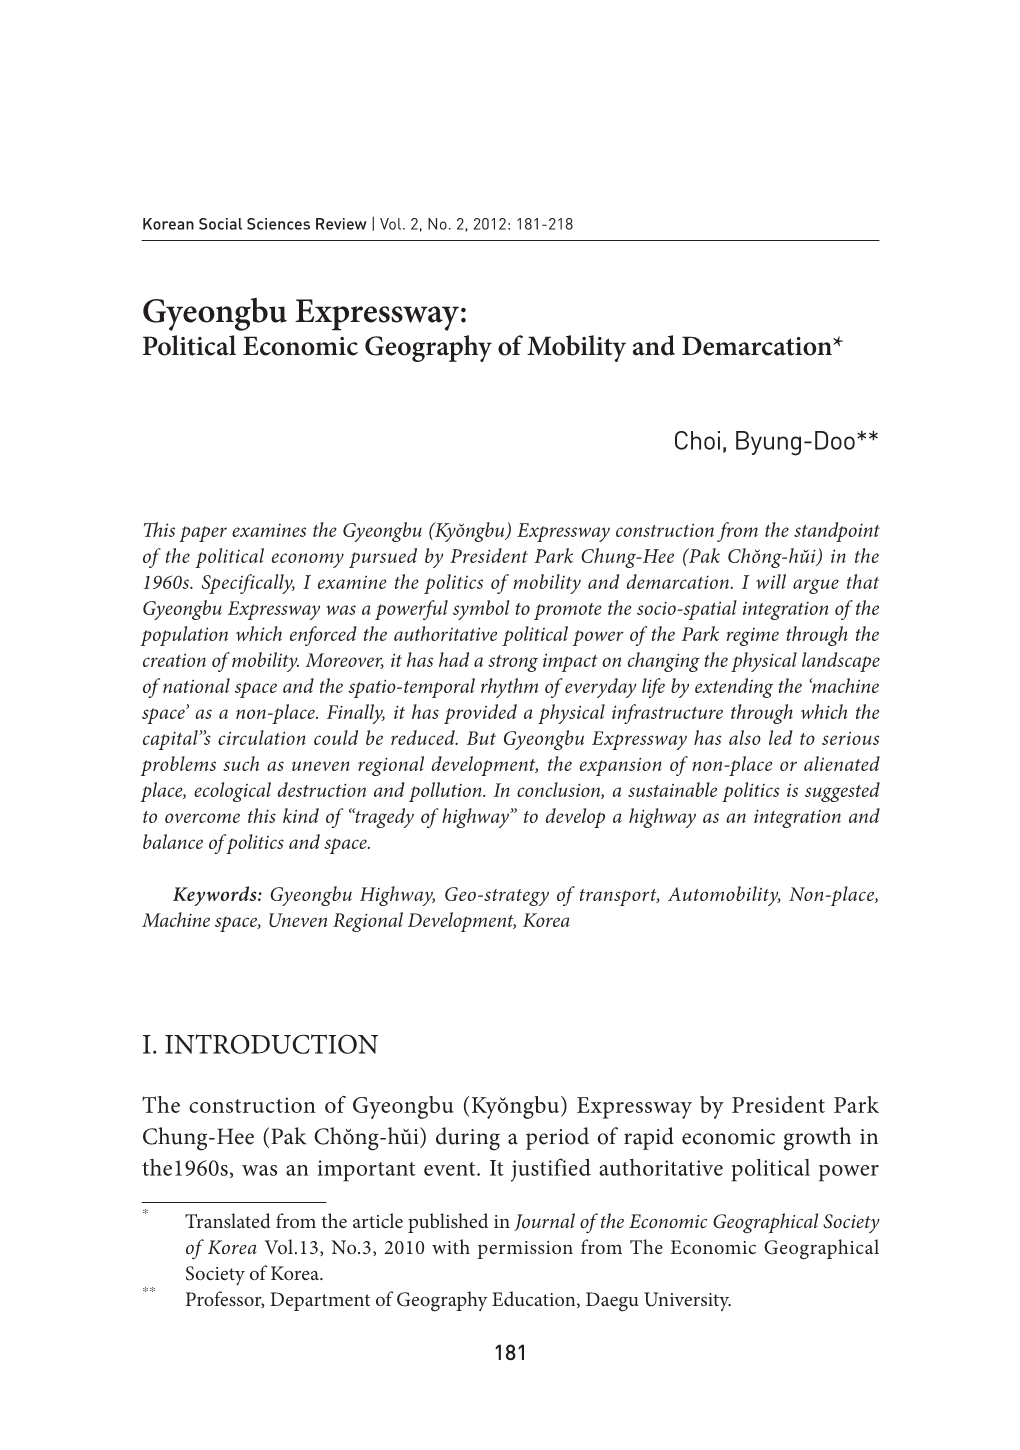 Gyeongbu Expressway: Political Economic Geography of Mobility and Demarcation*